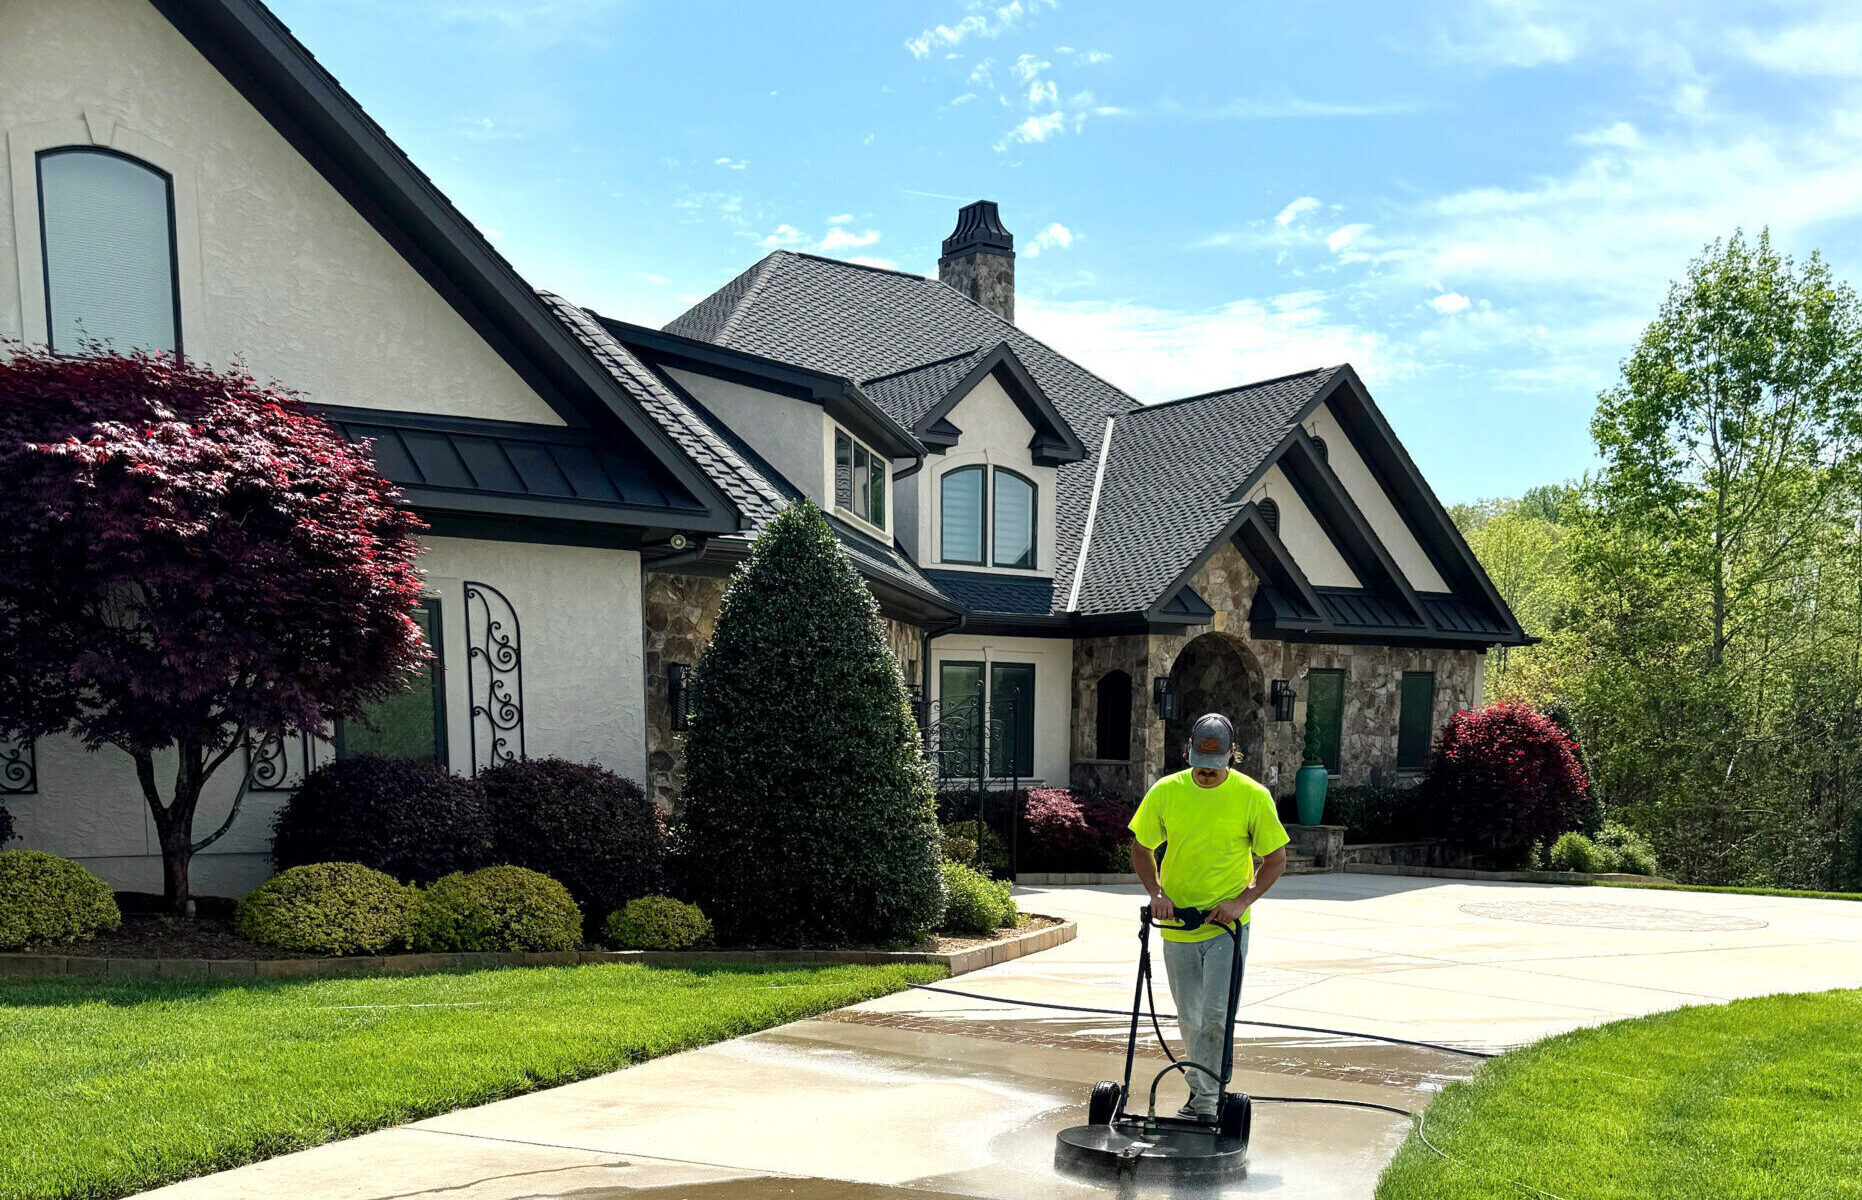 Charlotte Area Pressure Washing and Paint Removal Company | Residential and Commercial exterior cleaning | Mecklenburg County Area, NC